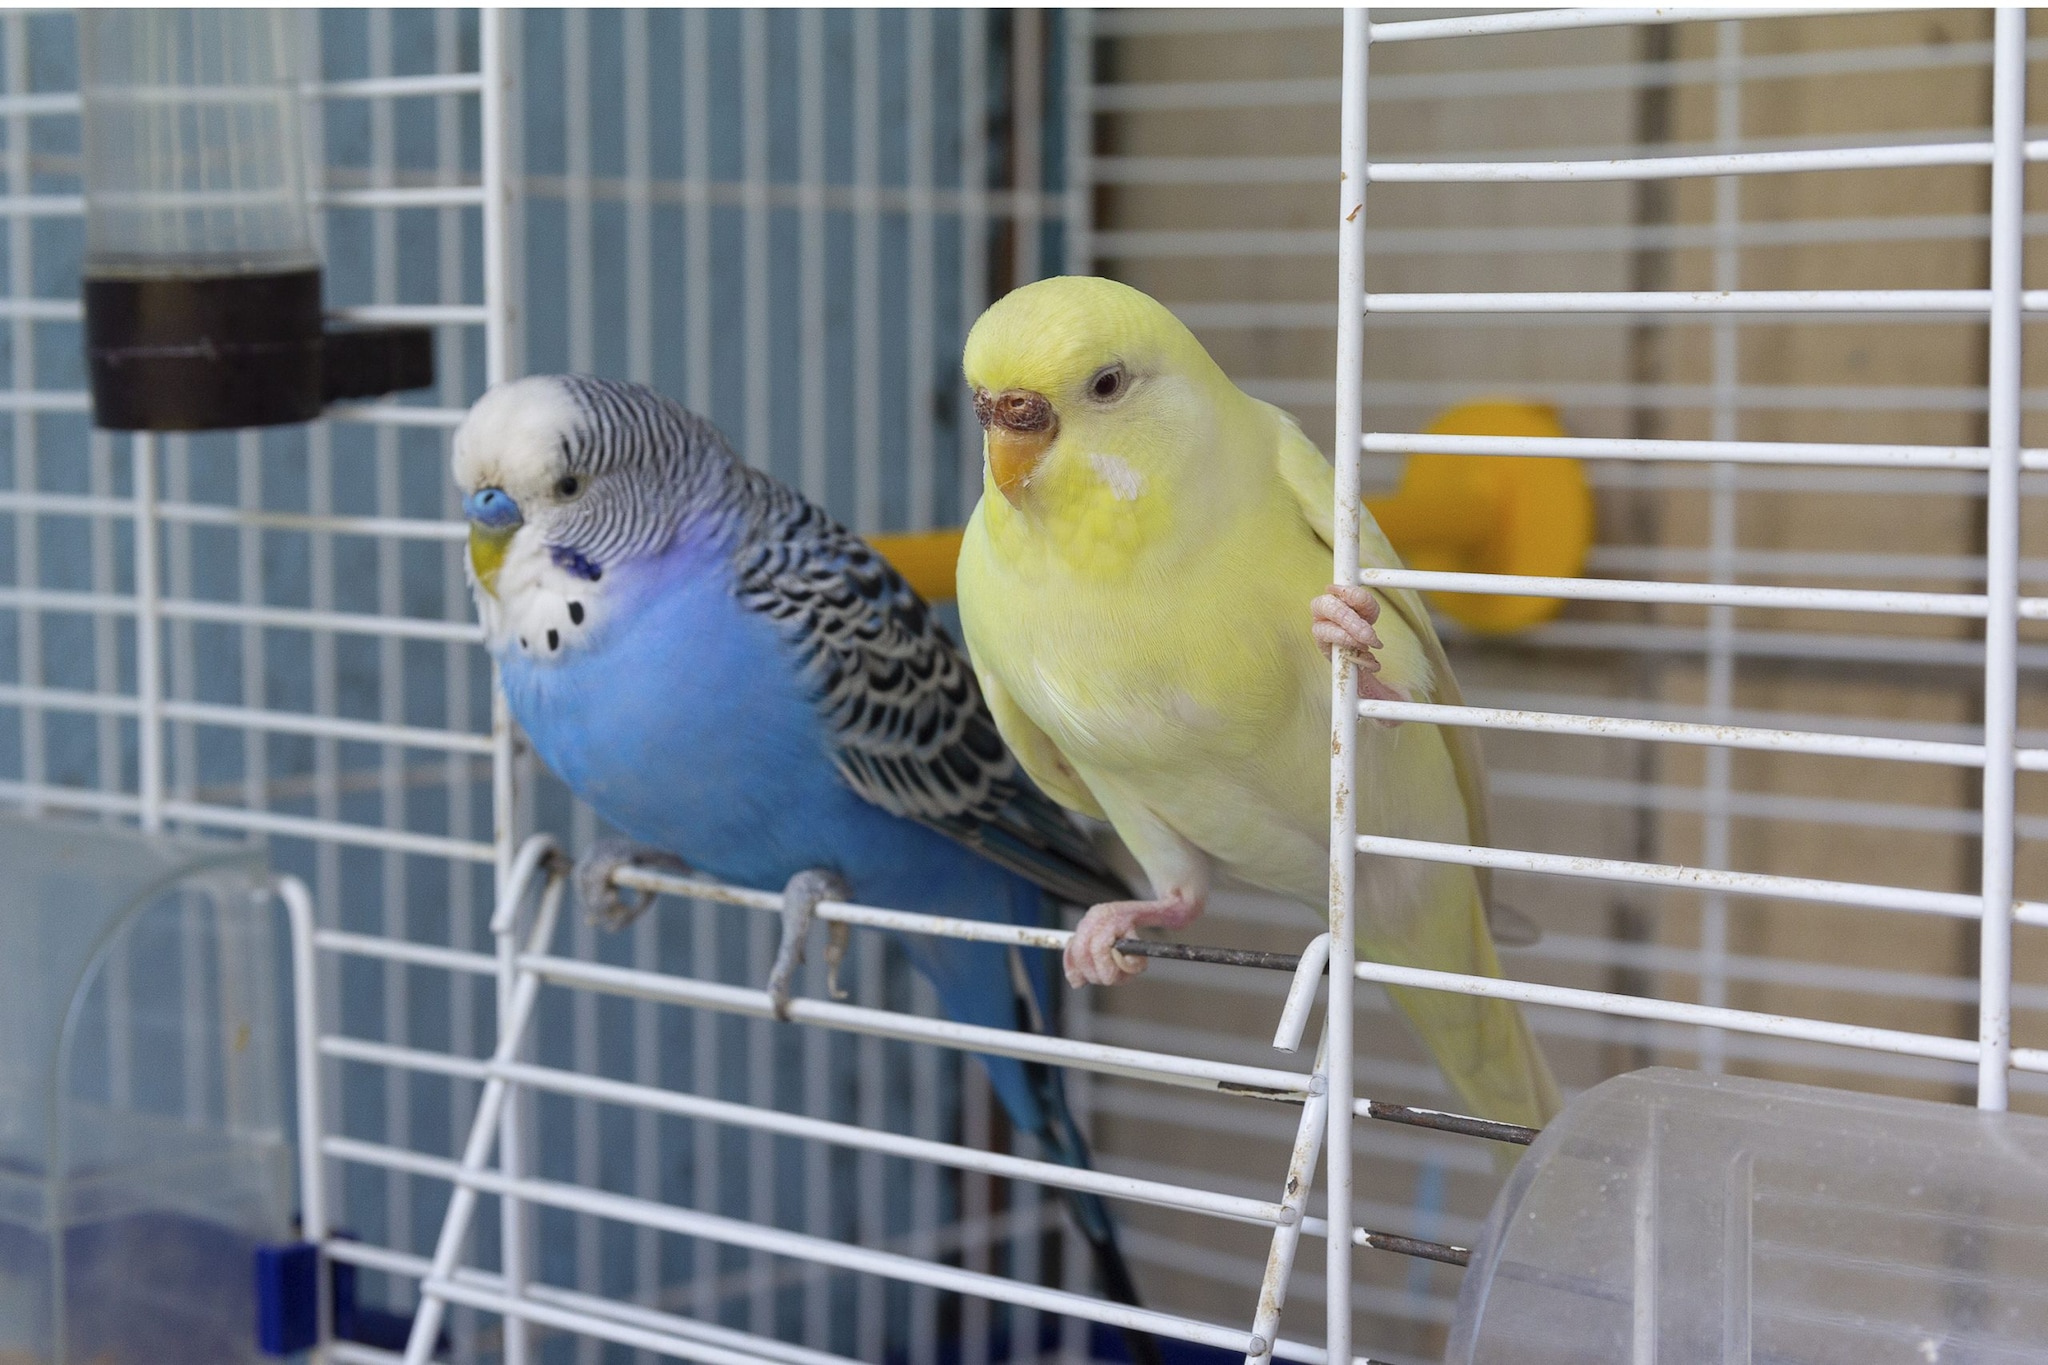 Two parakeets in a cage